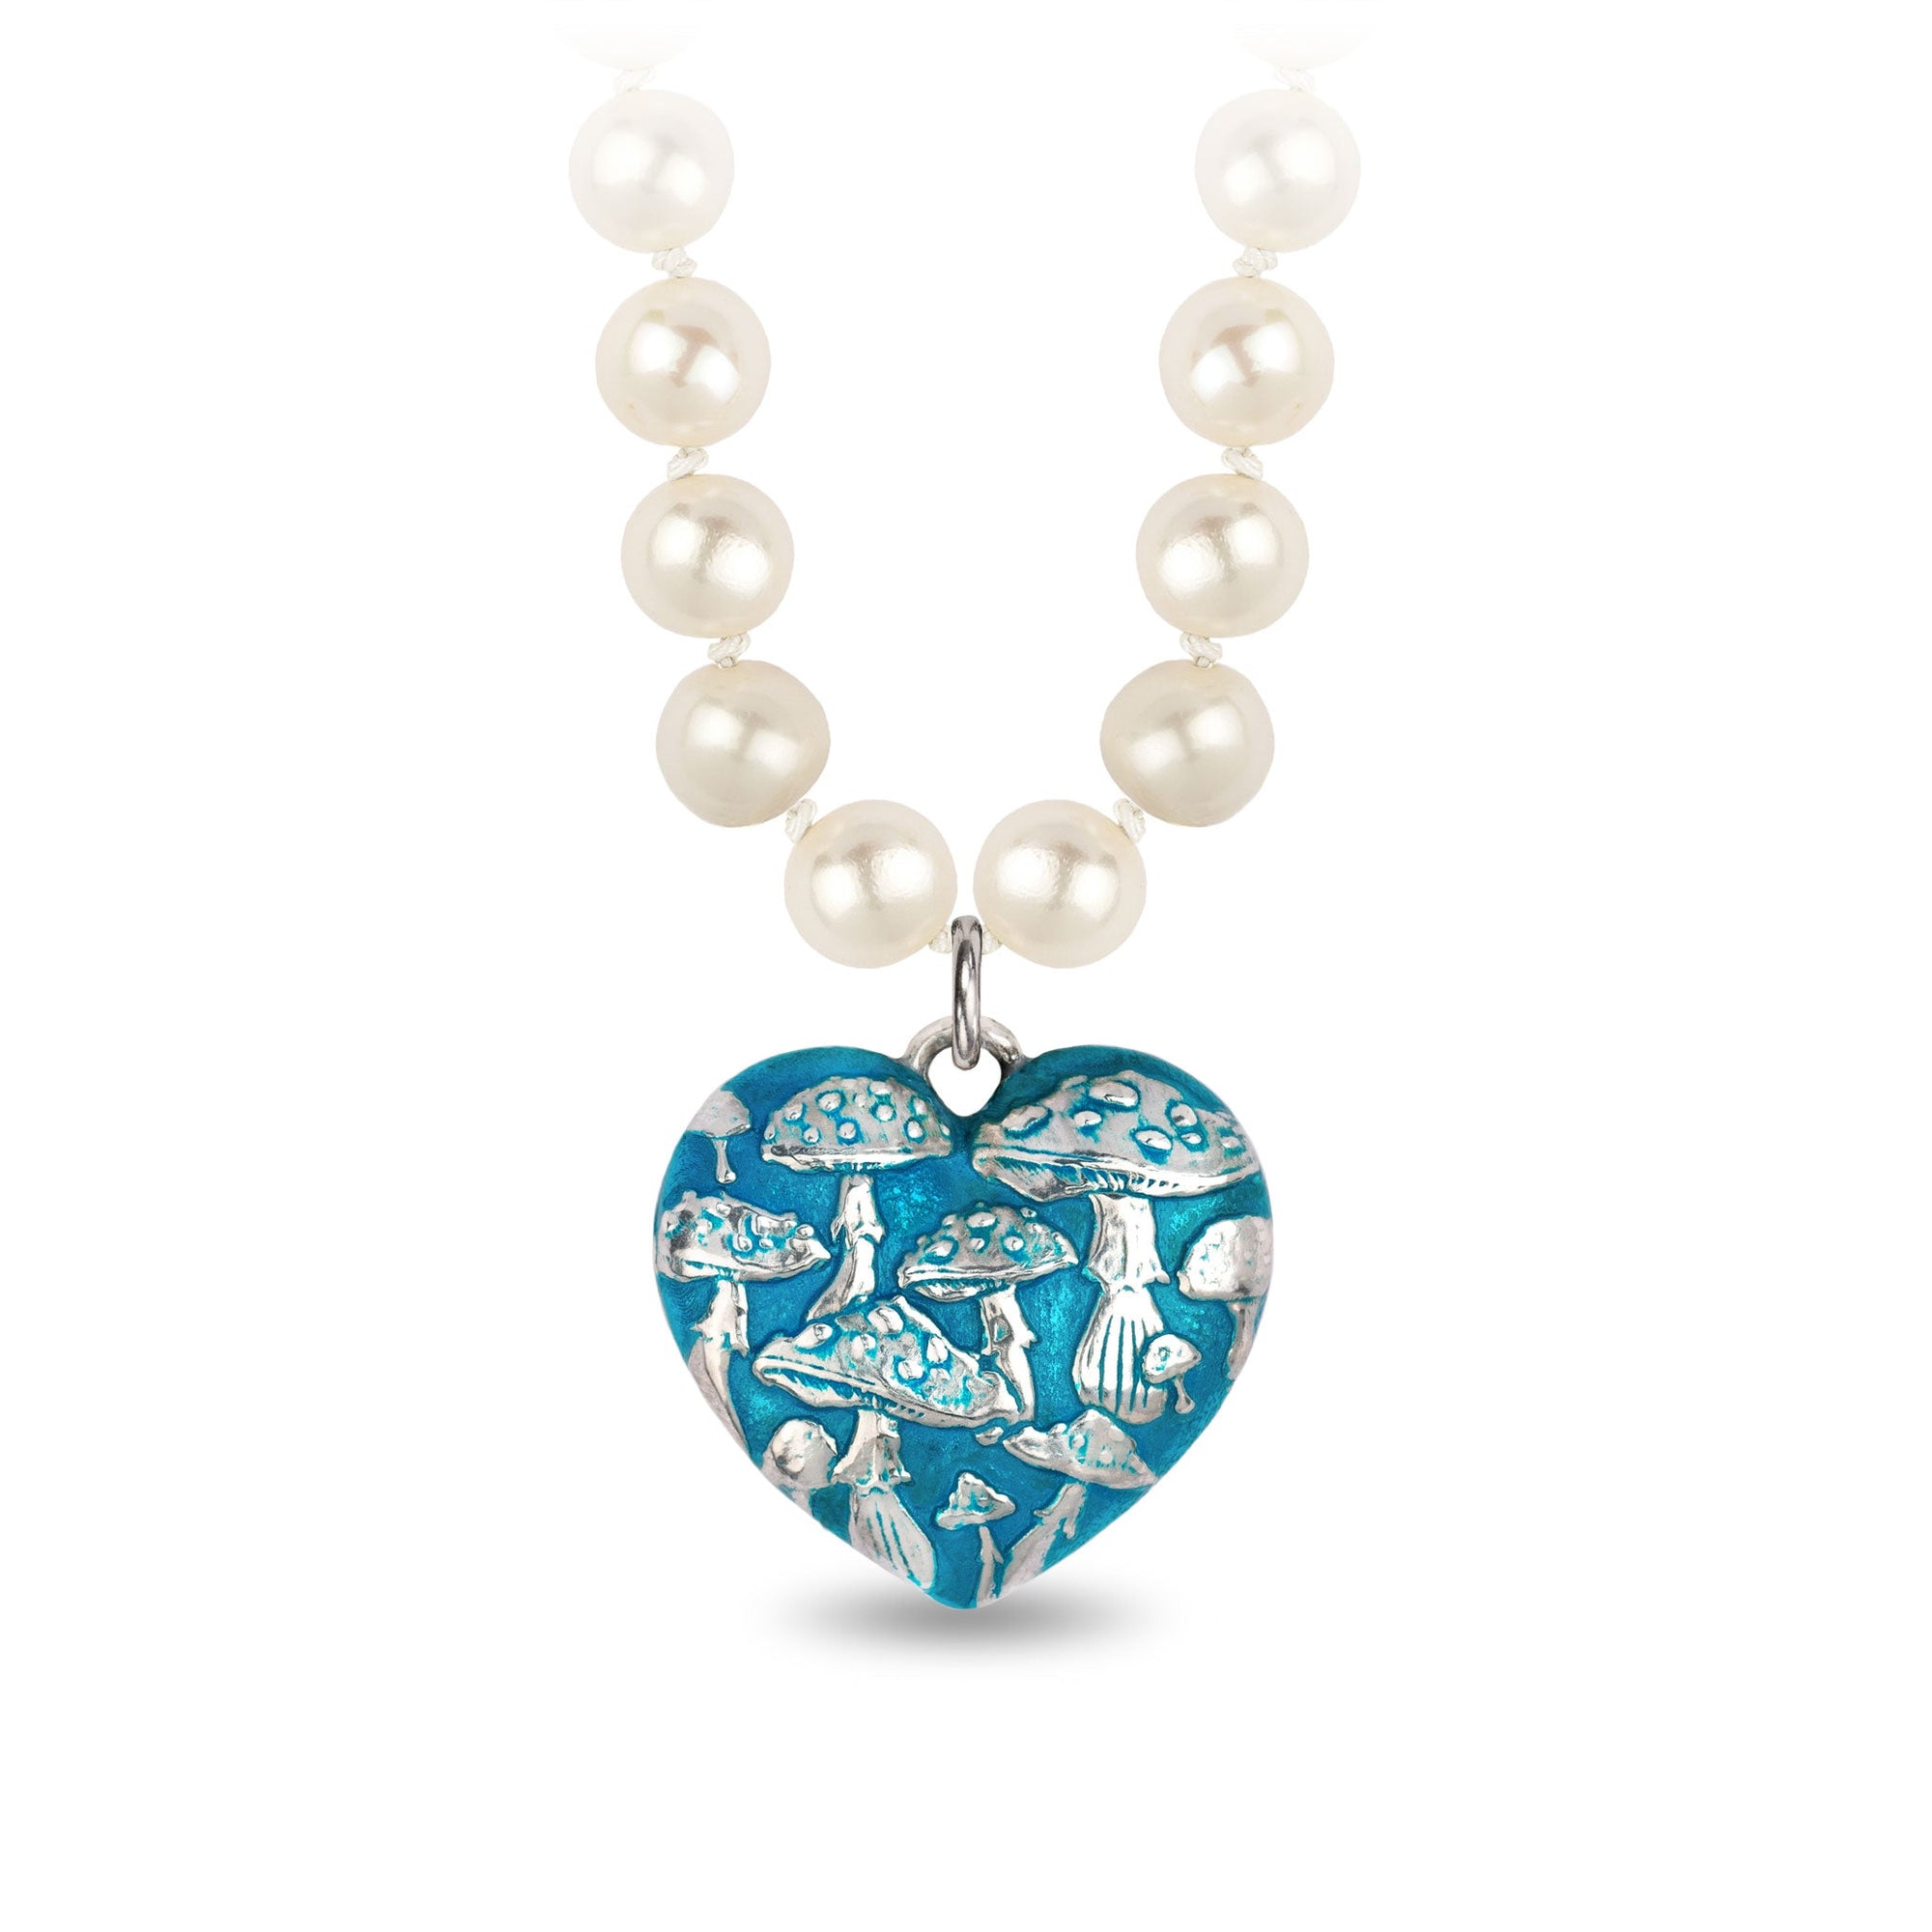 Mushroom Large Puffed Heart Knotted Freshwater Pearl Necklace - Capri Blue